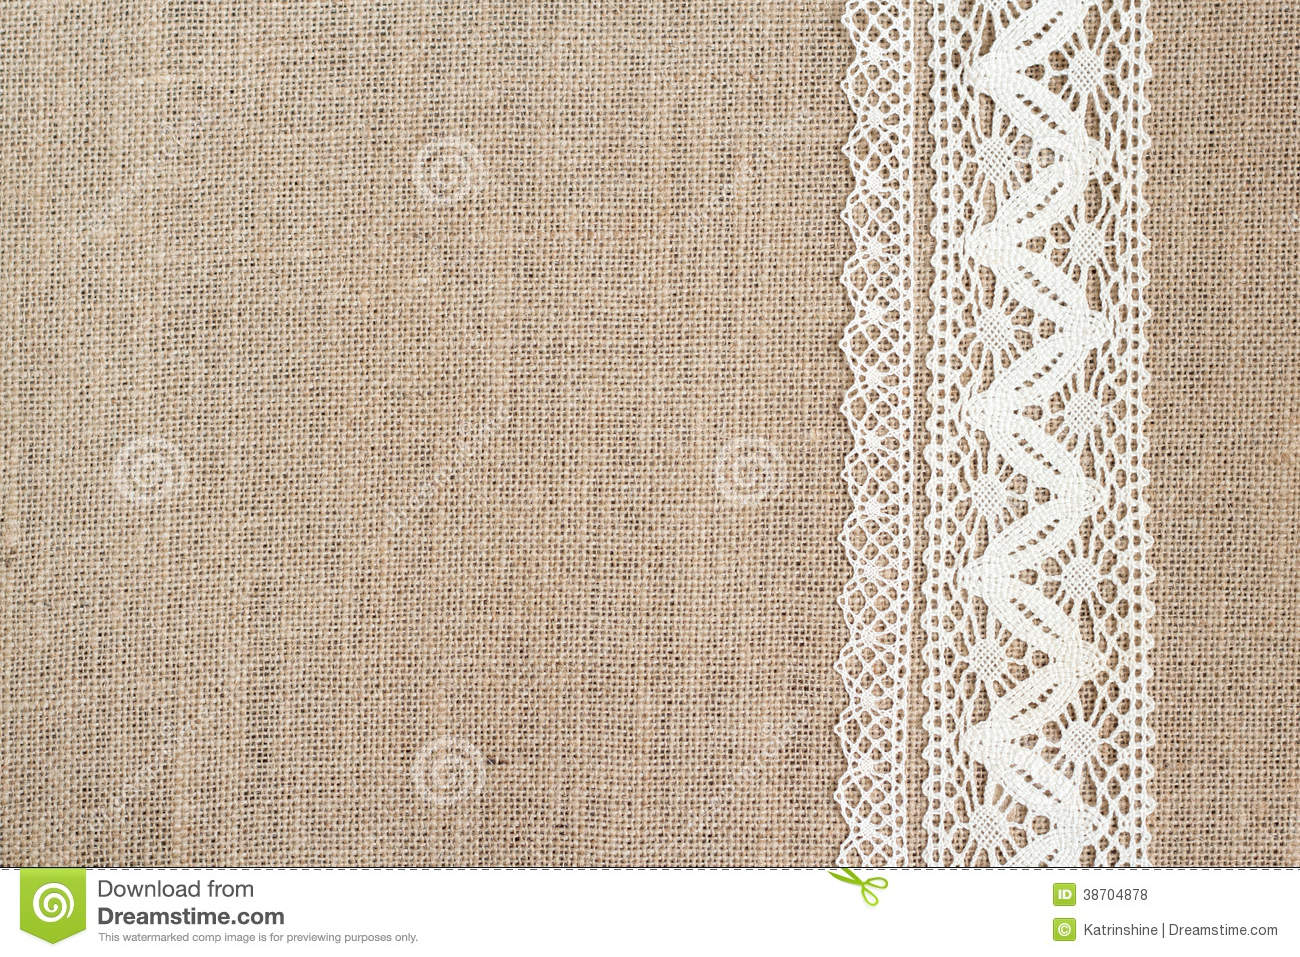 Burlap Background With Lace Royalty Free Stock Photos   Image